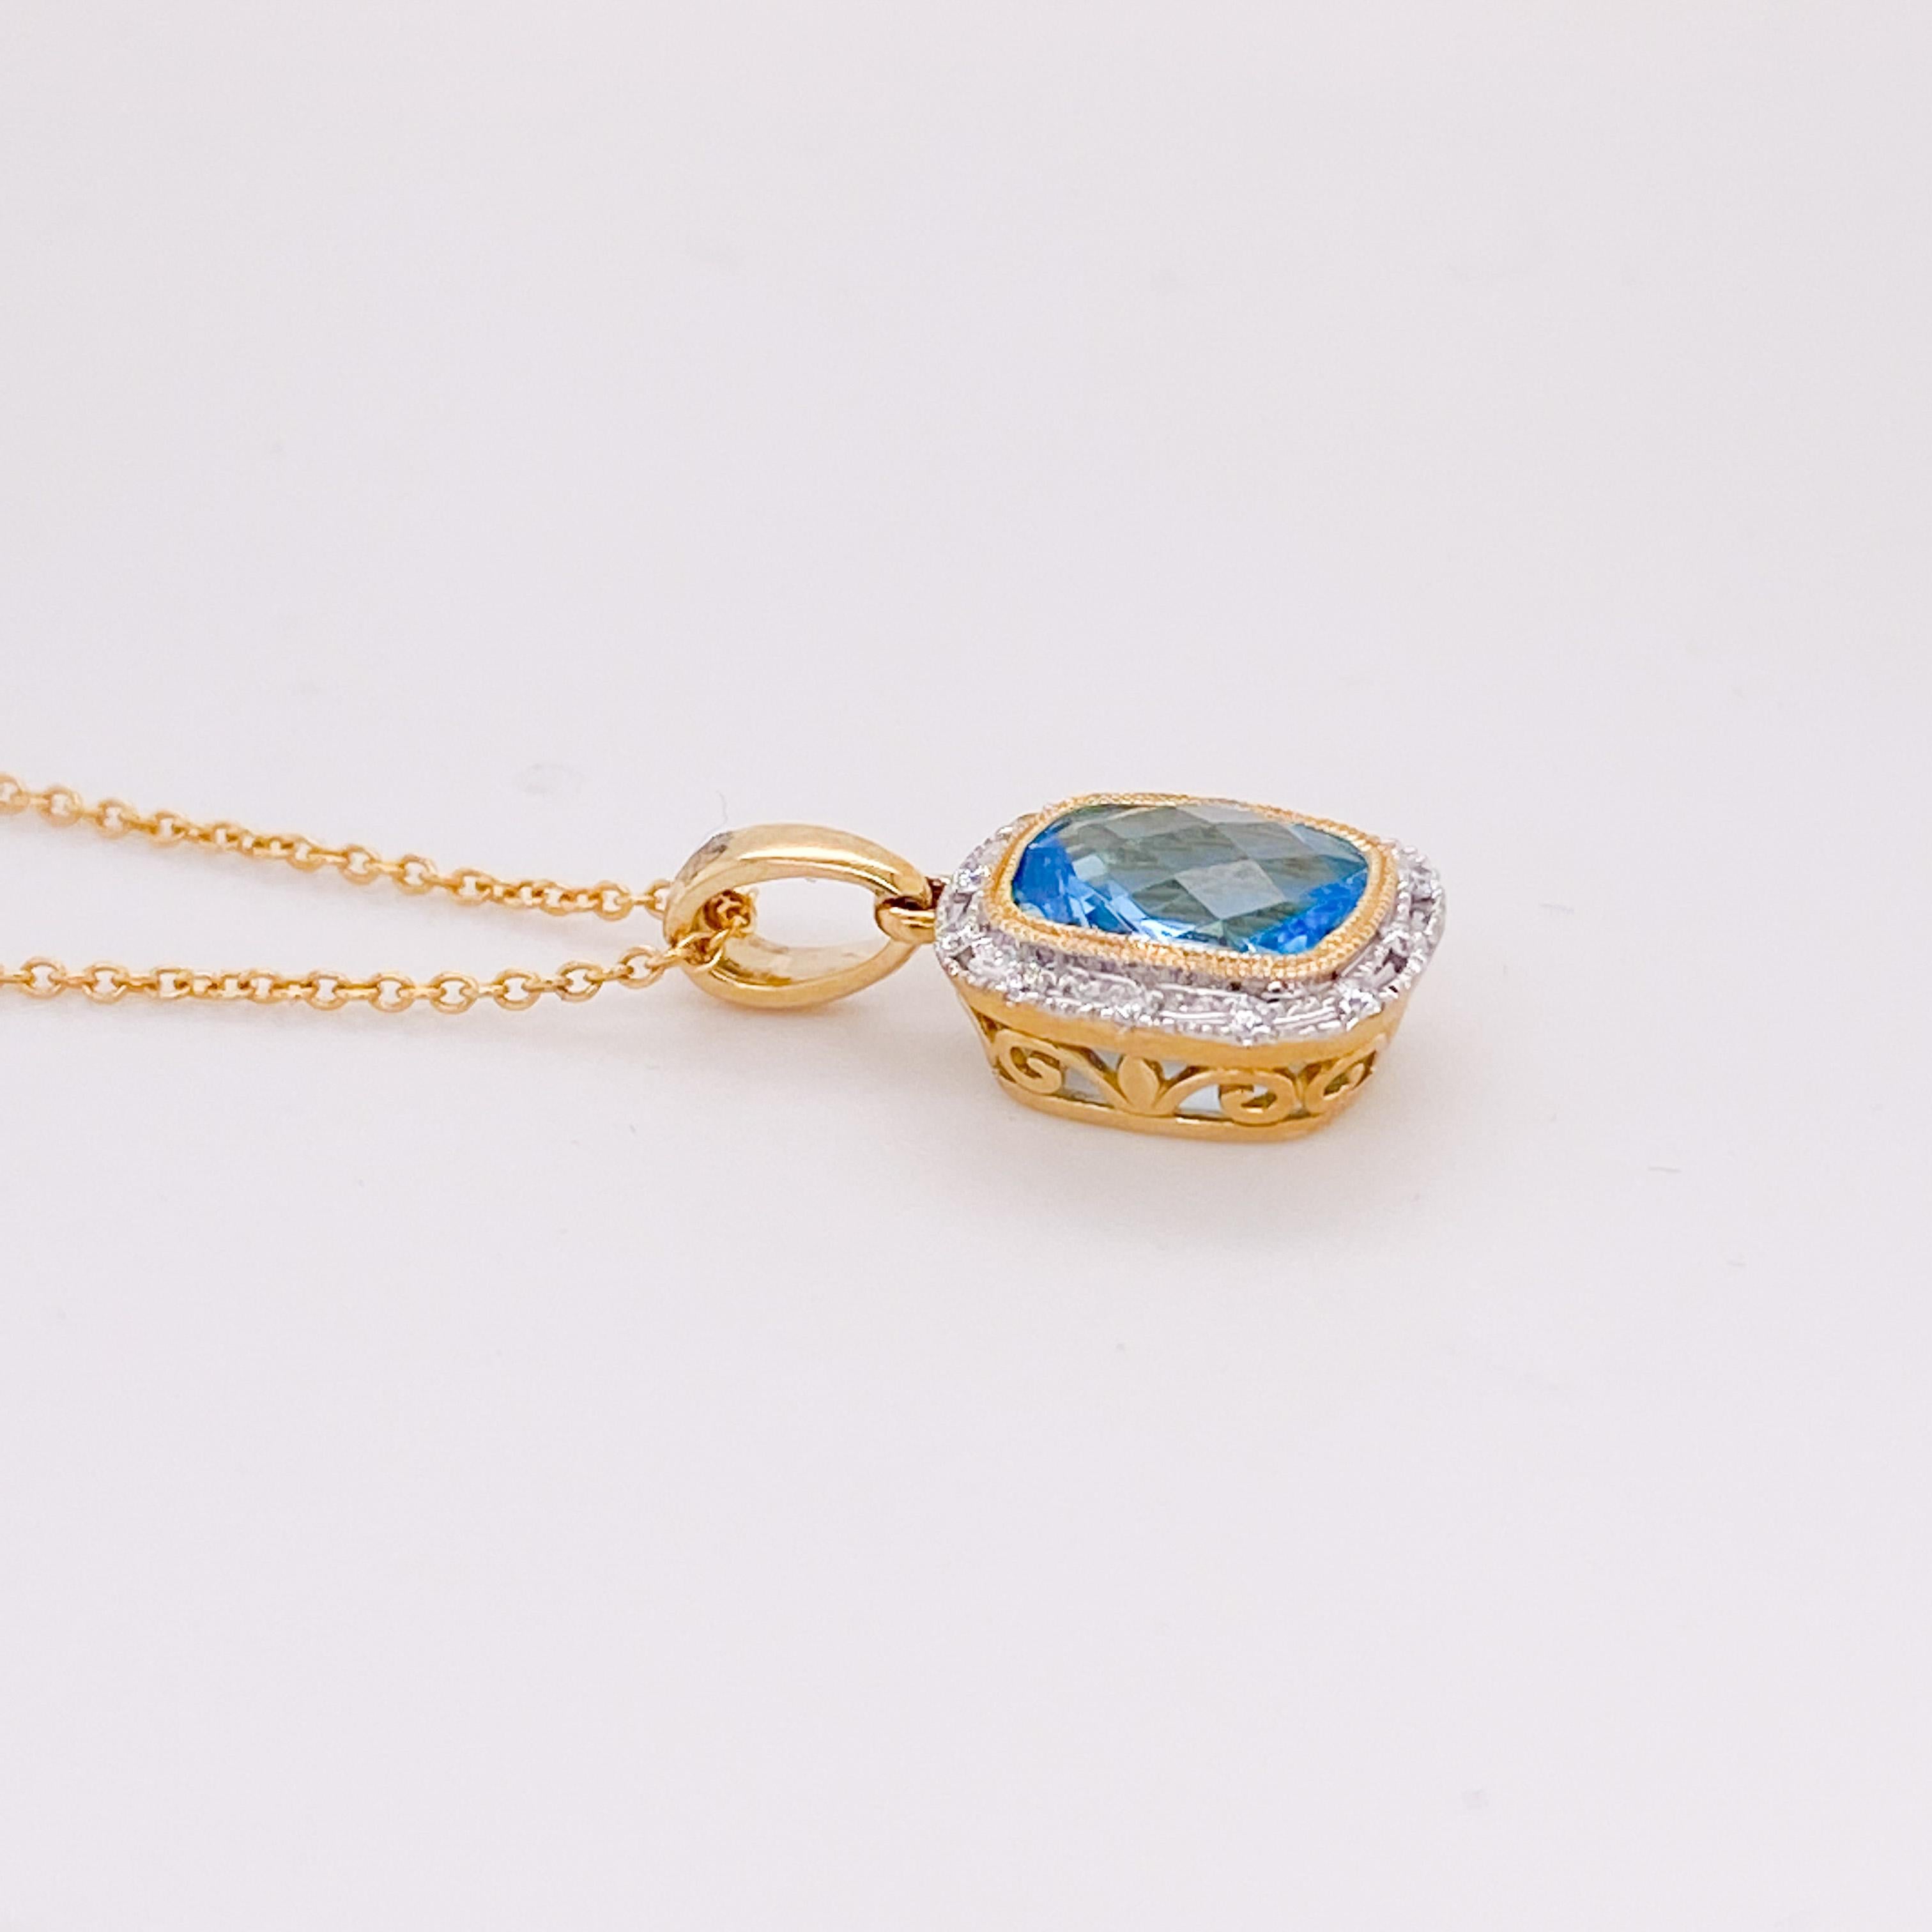 The cushion shape blue topaz is absolutely gorgeous. The scroll details on the pendant add a beautiful touch! The 14 karat gold cable chain is a lovely sleek look and secure design. You will not be disappointed with all the fine details of this